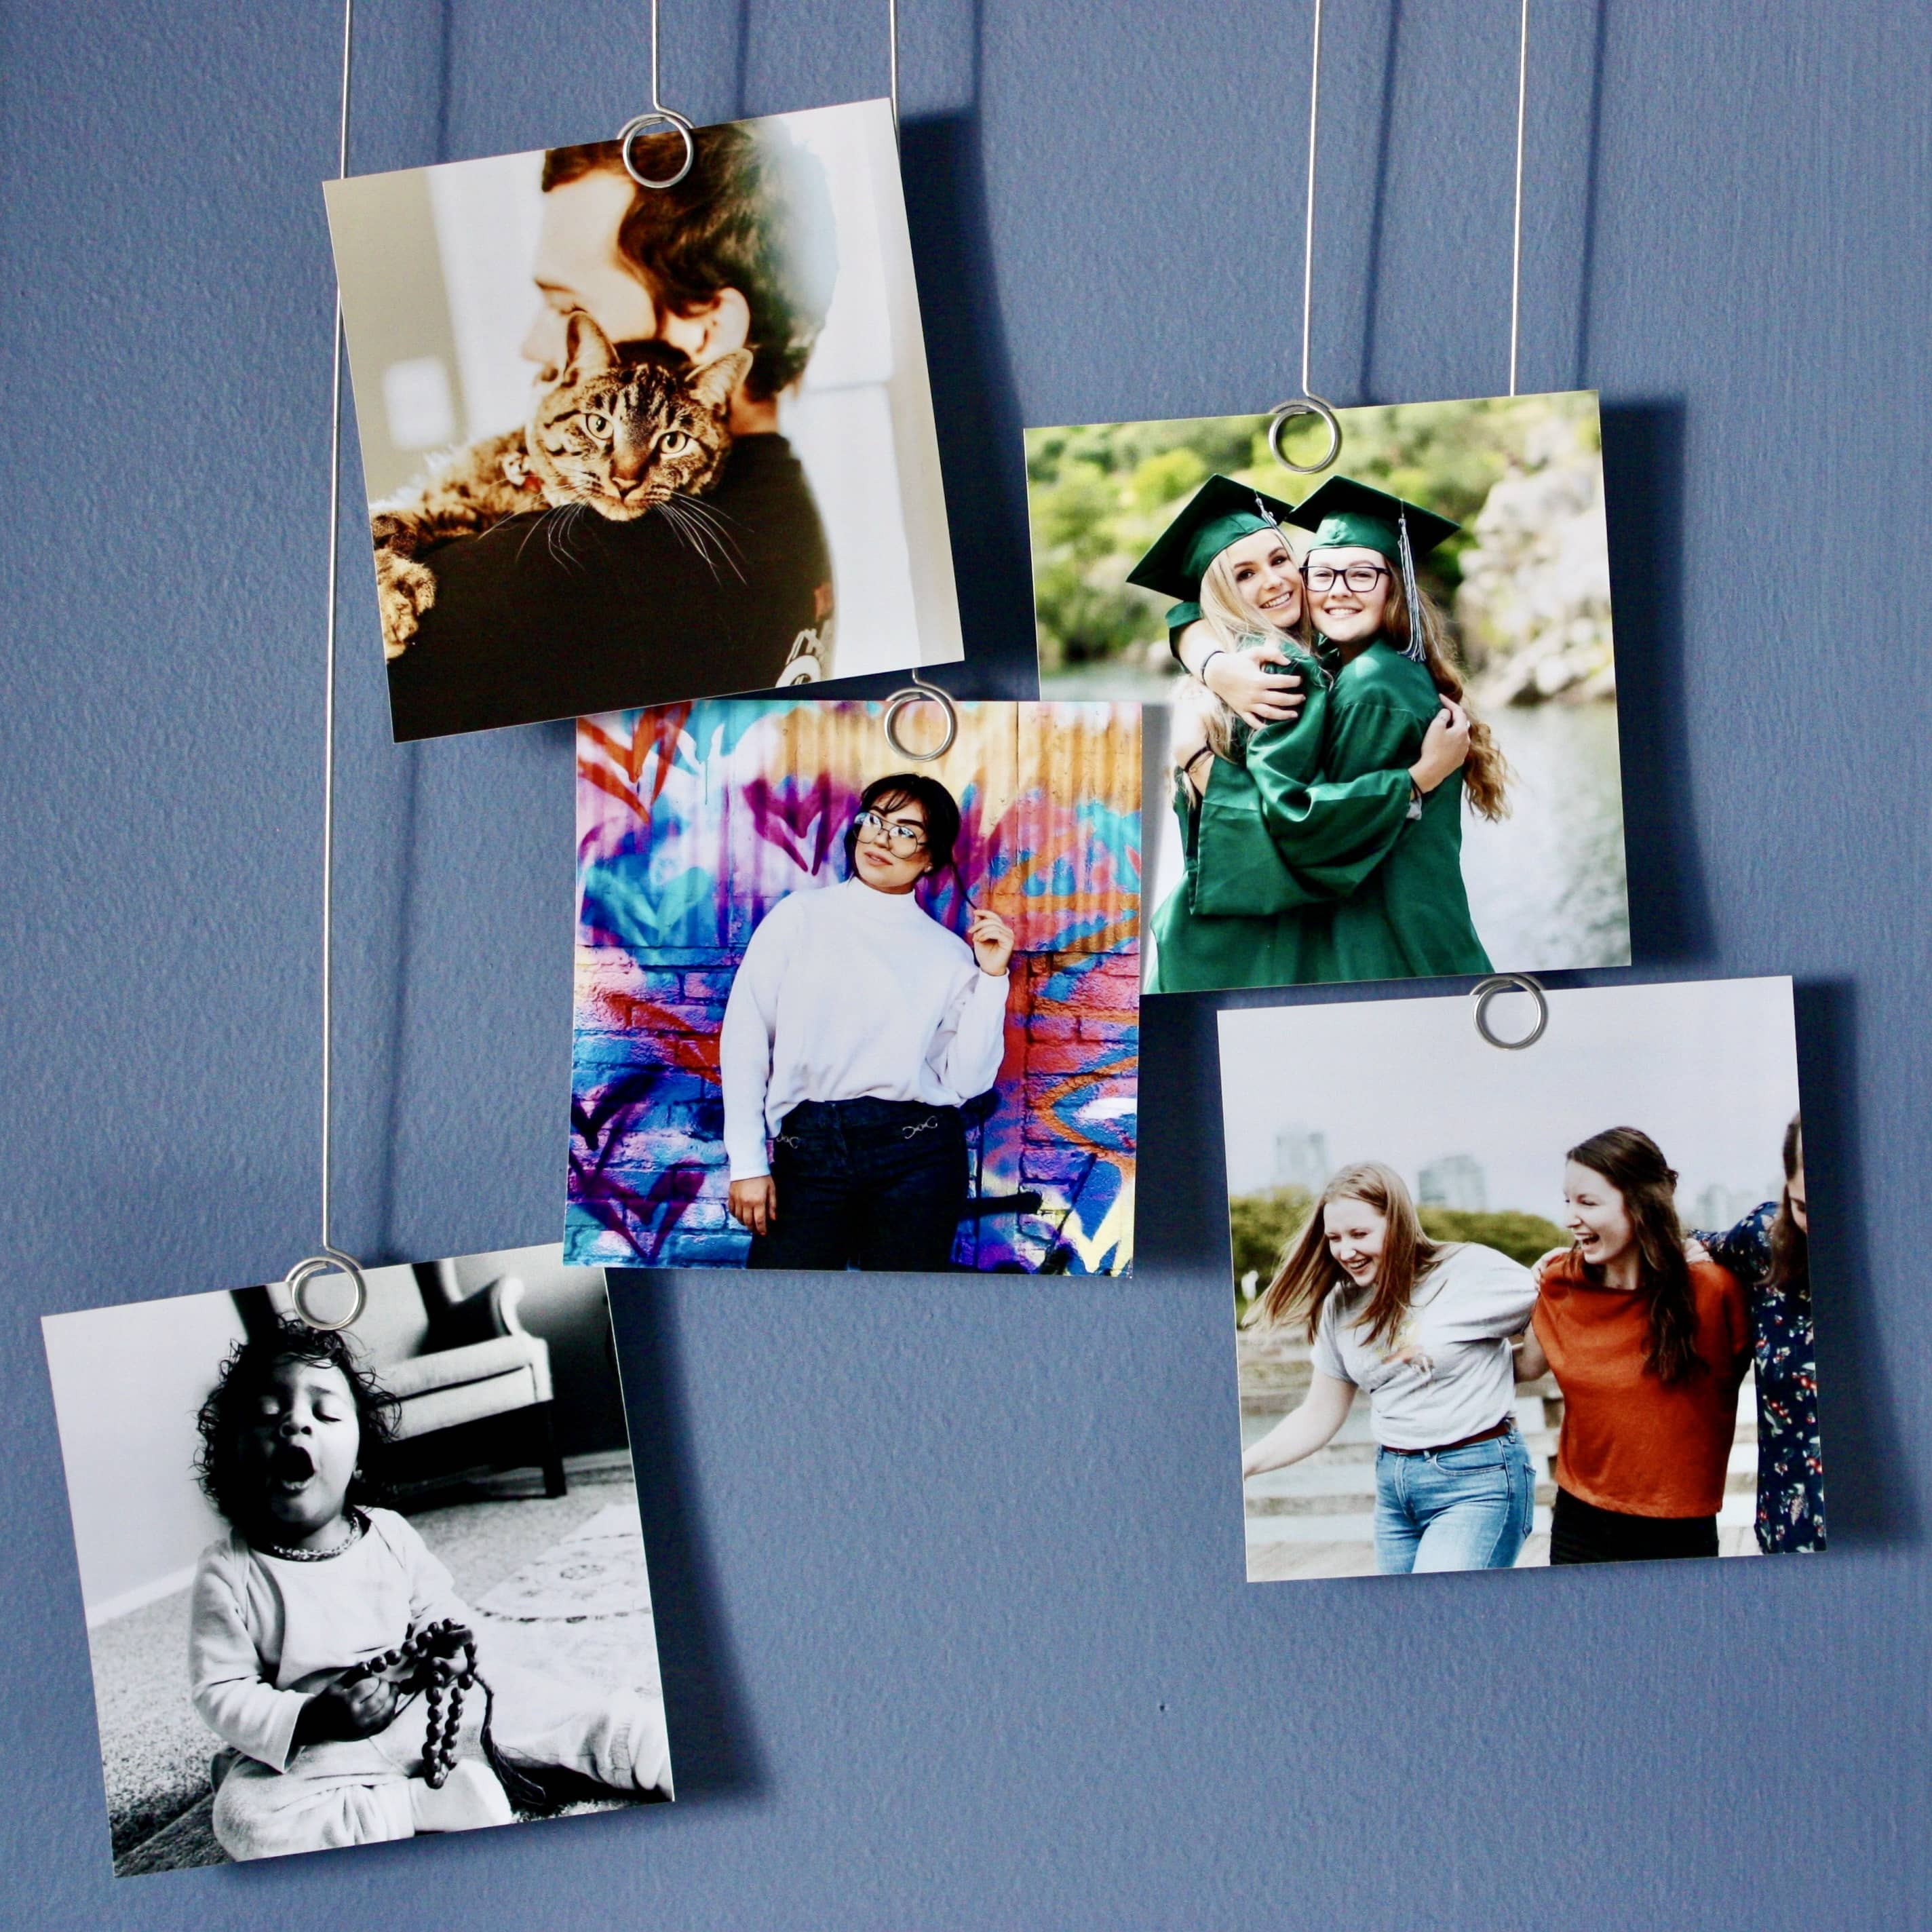 Hanging Pictures